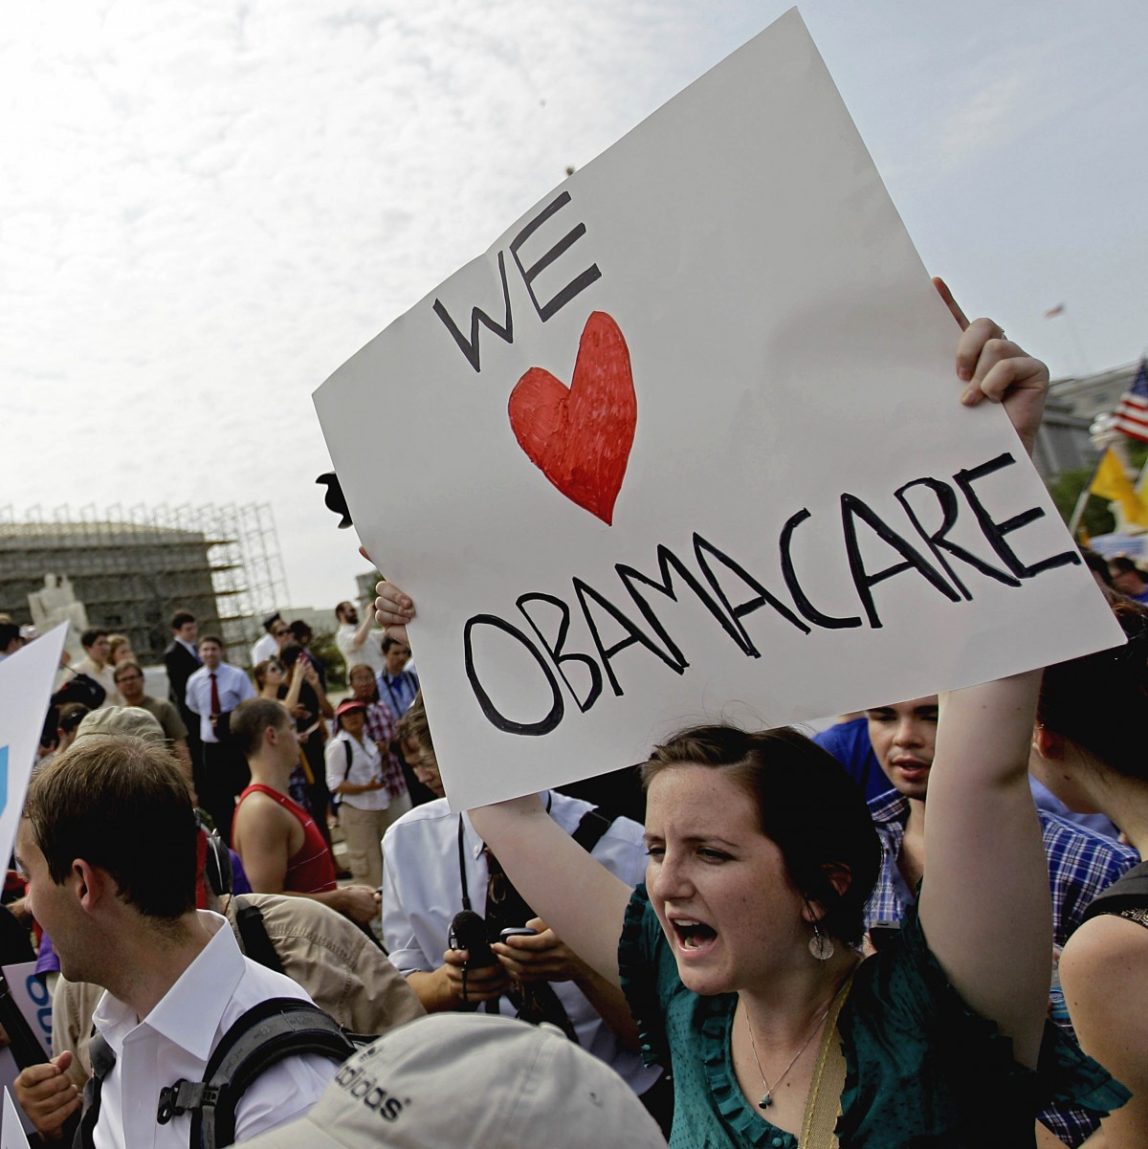 In this June 28, 2012 file photo, supporters of President Barack Obama's health care law celebrate outside the Supreme Court in Washington. (AP Photo/David Goldman, File)